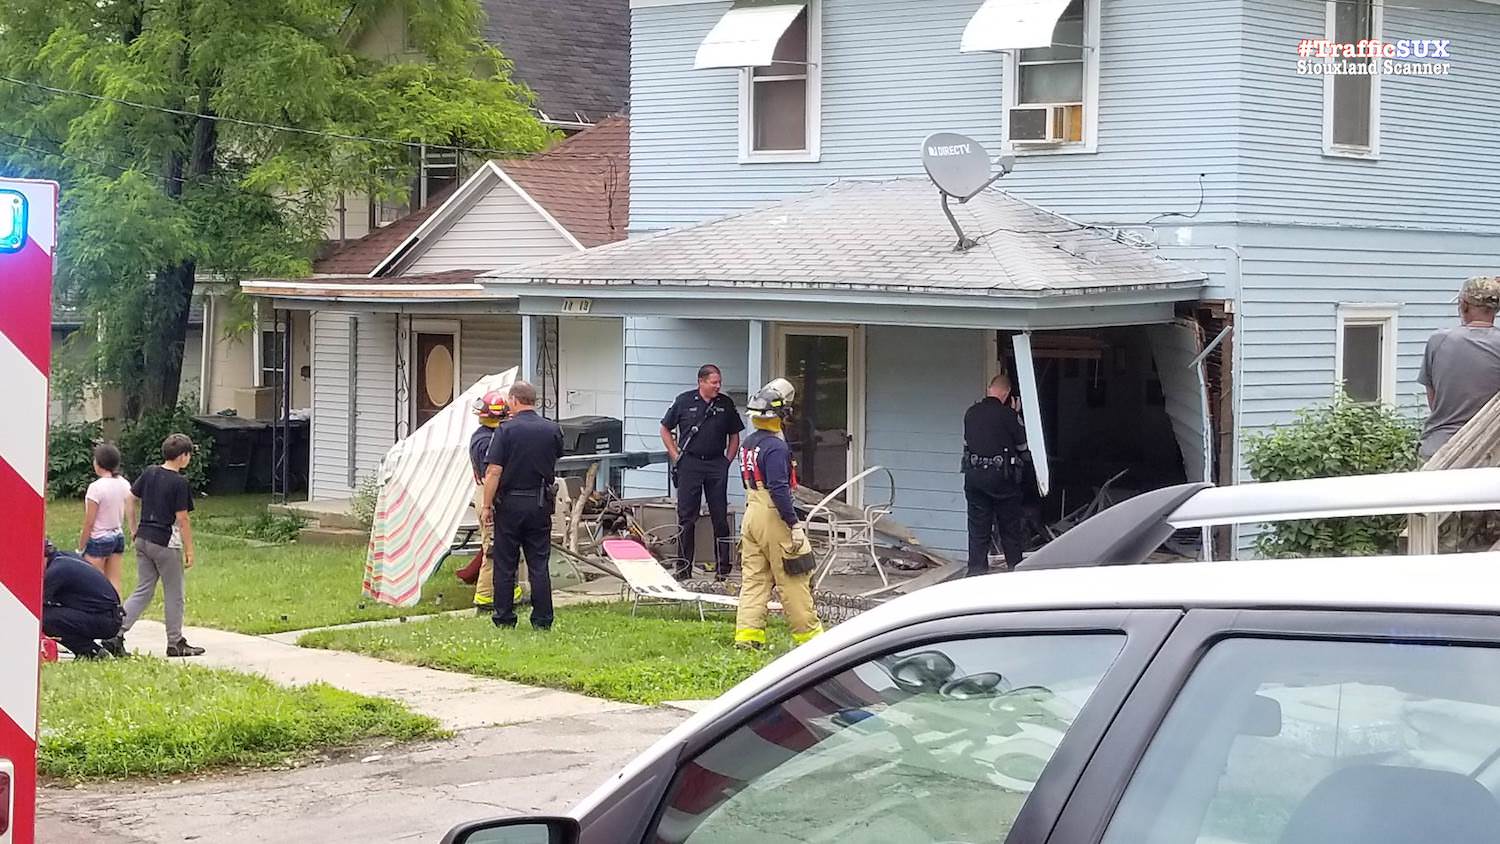 No injuries when an SUV crashed into home and the driver fled the scene before being arrested